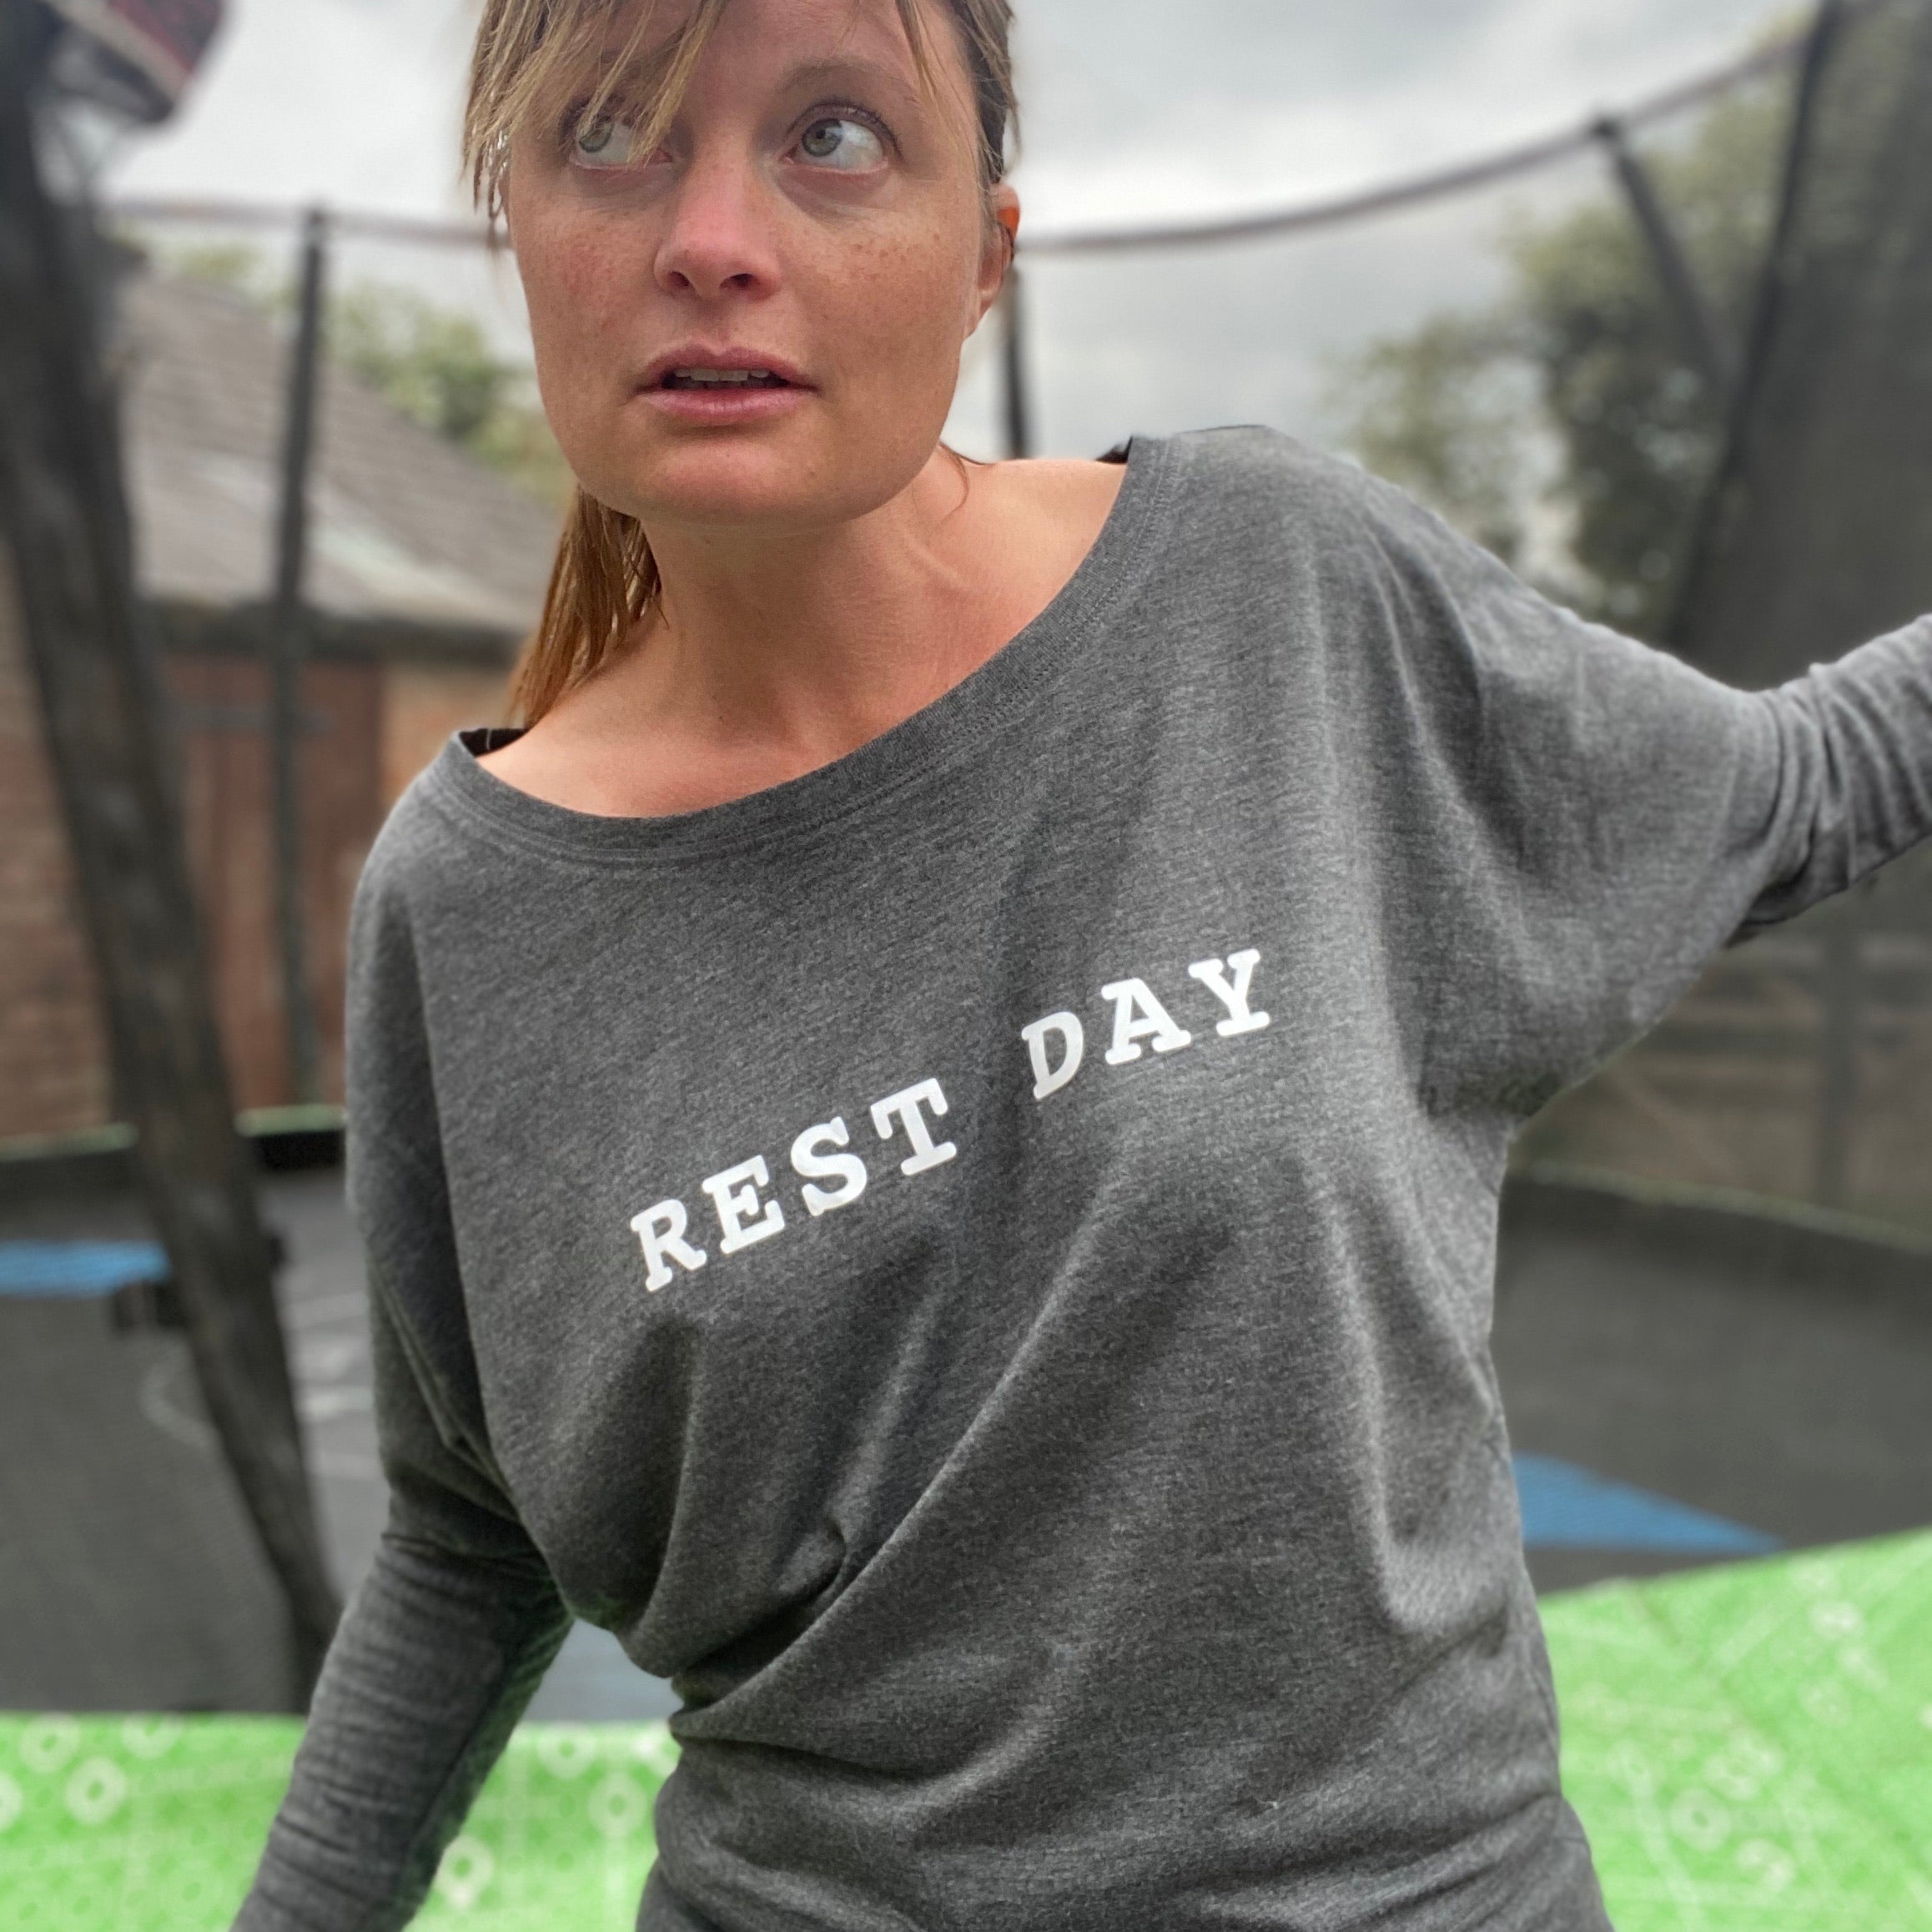 Women's Rest Day Long Sleeve Lounge Tee - Discontinued Style - Spoke & Solace